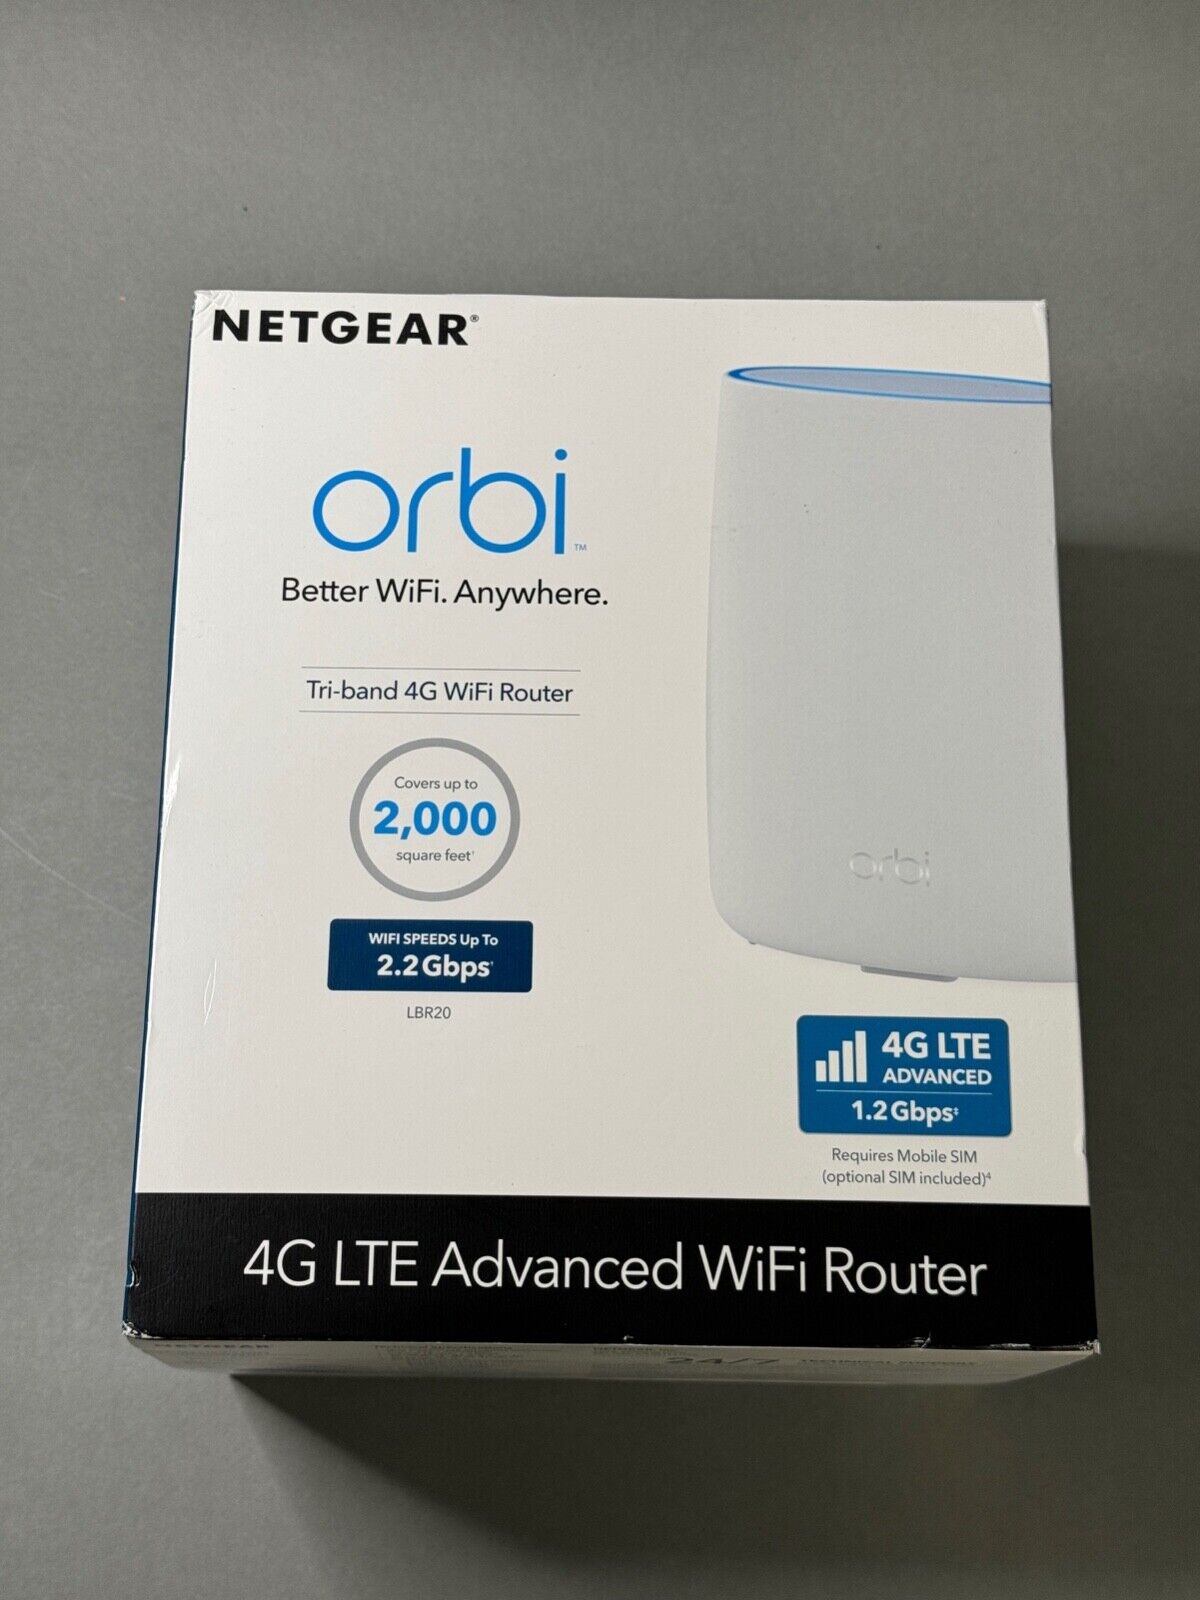 NEW Netgear Orbi Tri-band 4G WiFI Router LBR20-1USNAS in Box - No Charger